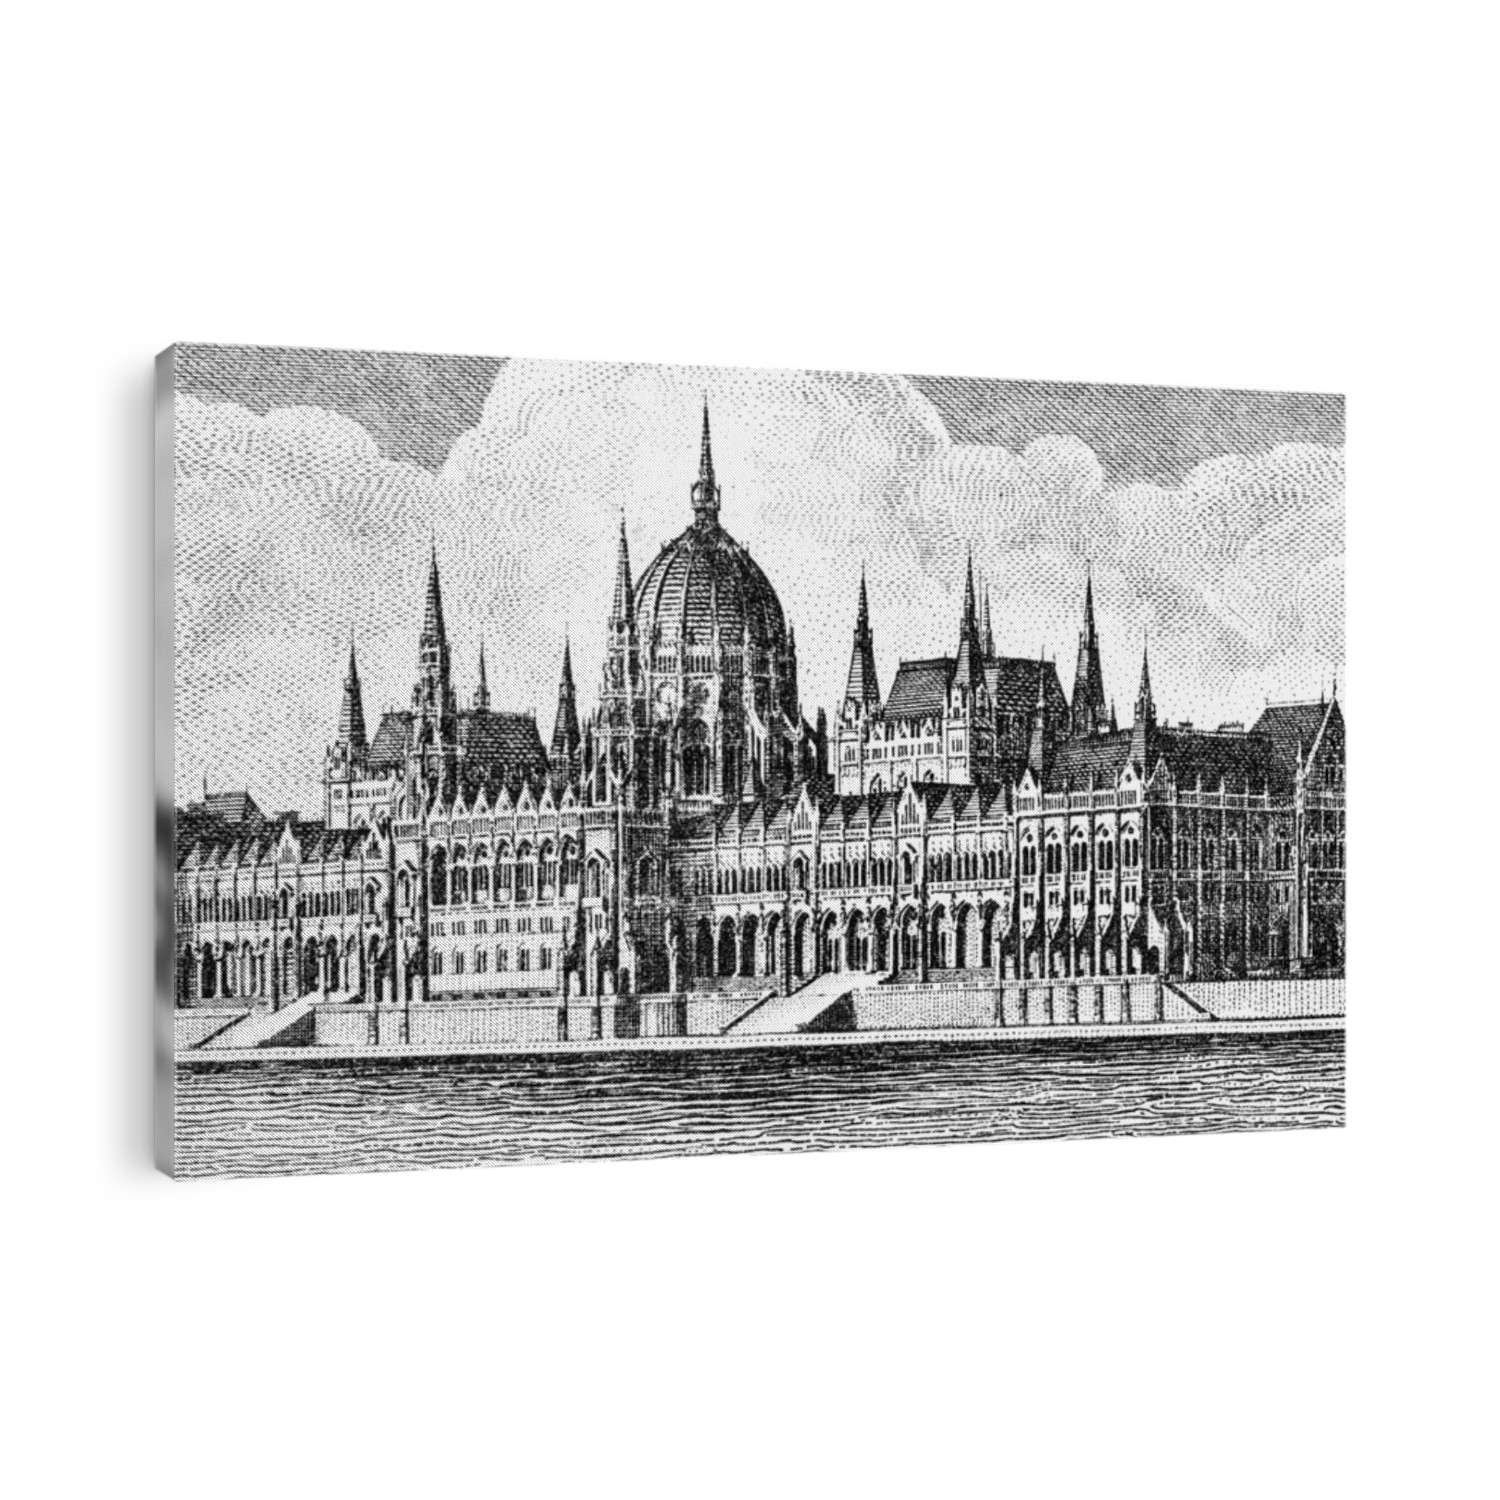 Orszaghaz - Hungarian Parliament building in Budapest. Portrait from Hungary 100 Million Pengo 1946  Banknotes. 